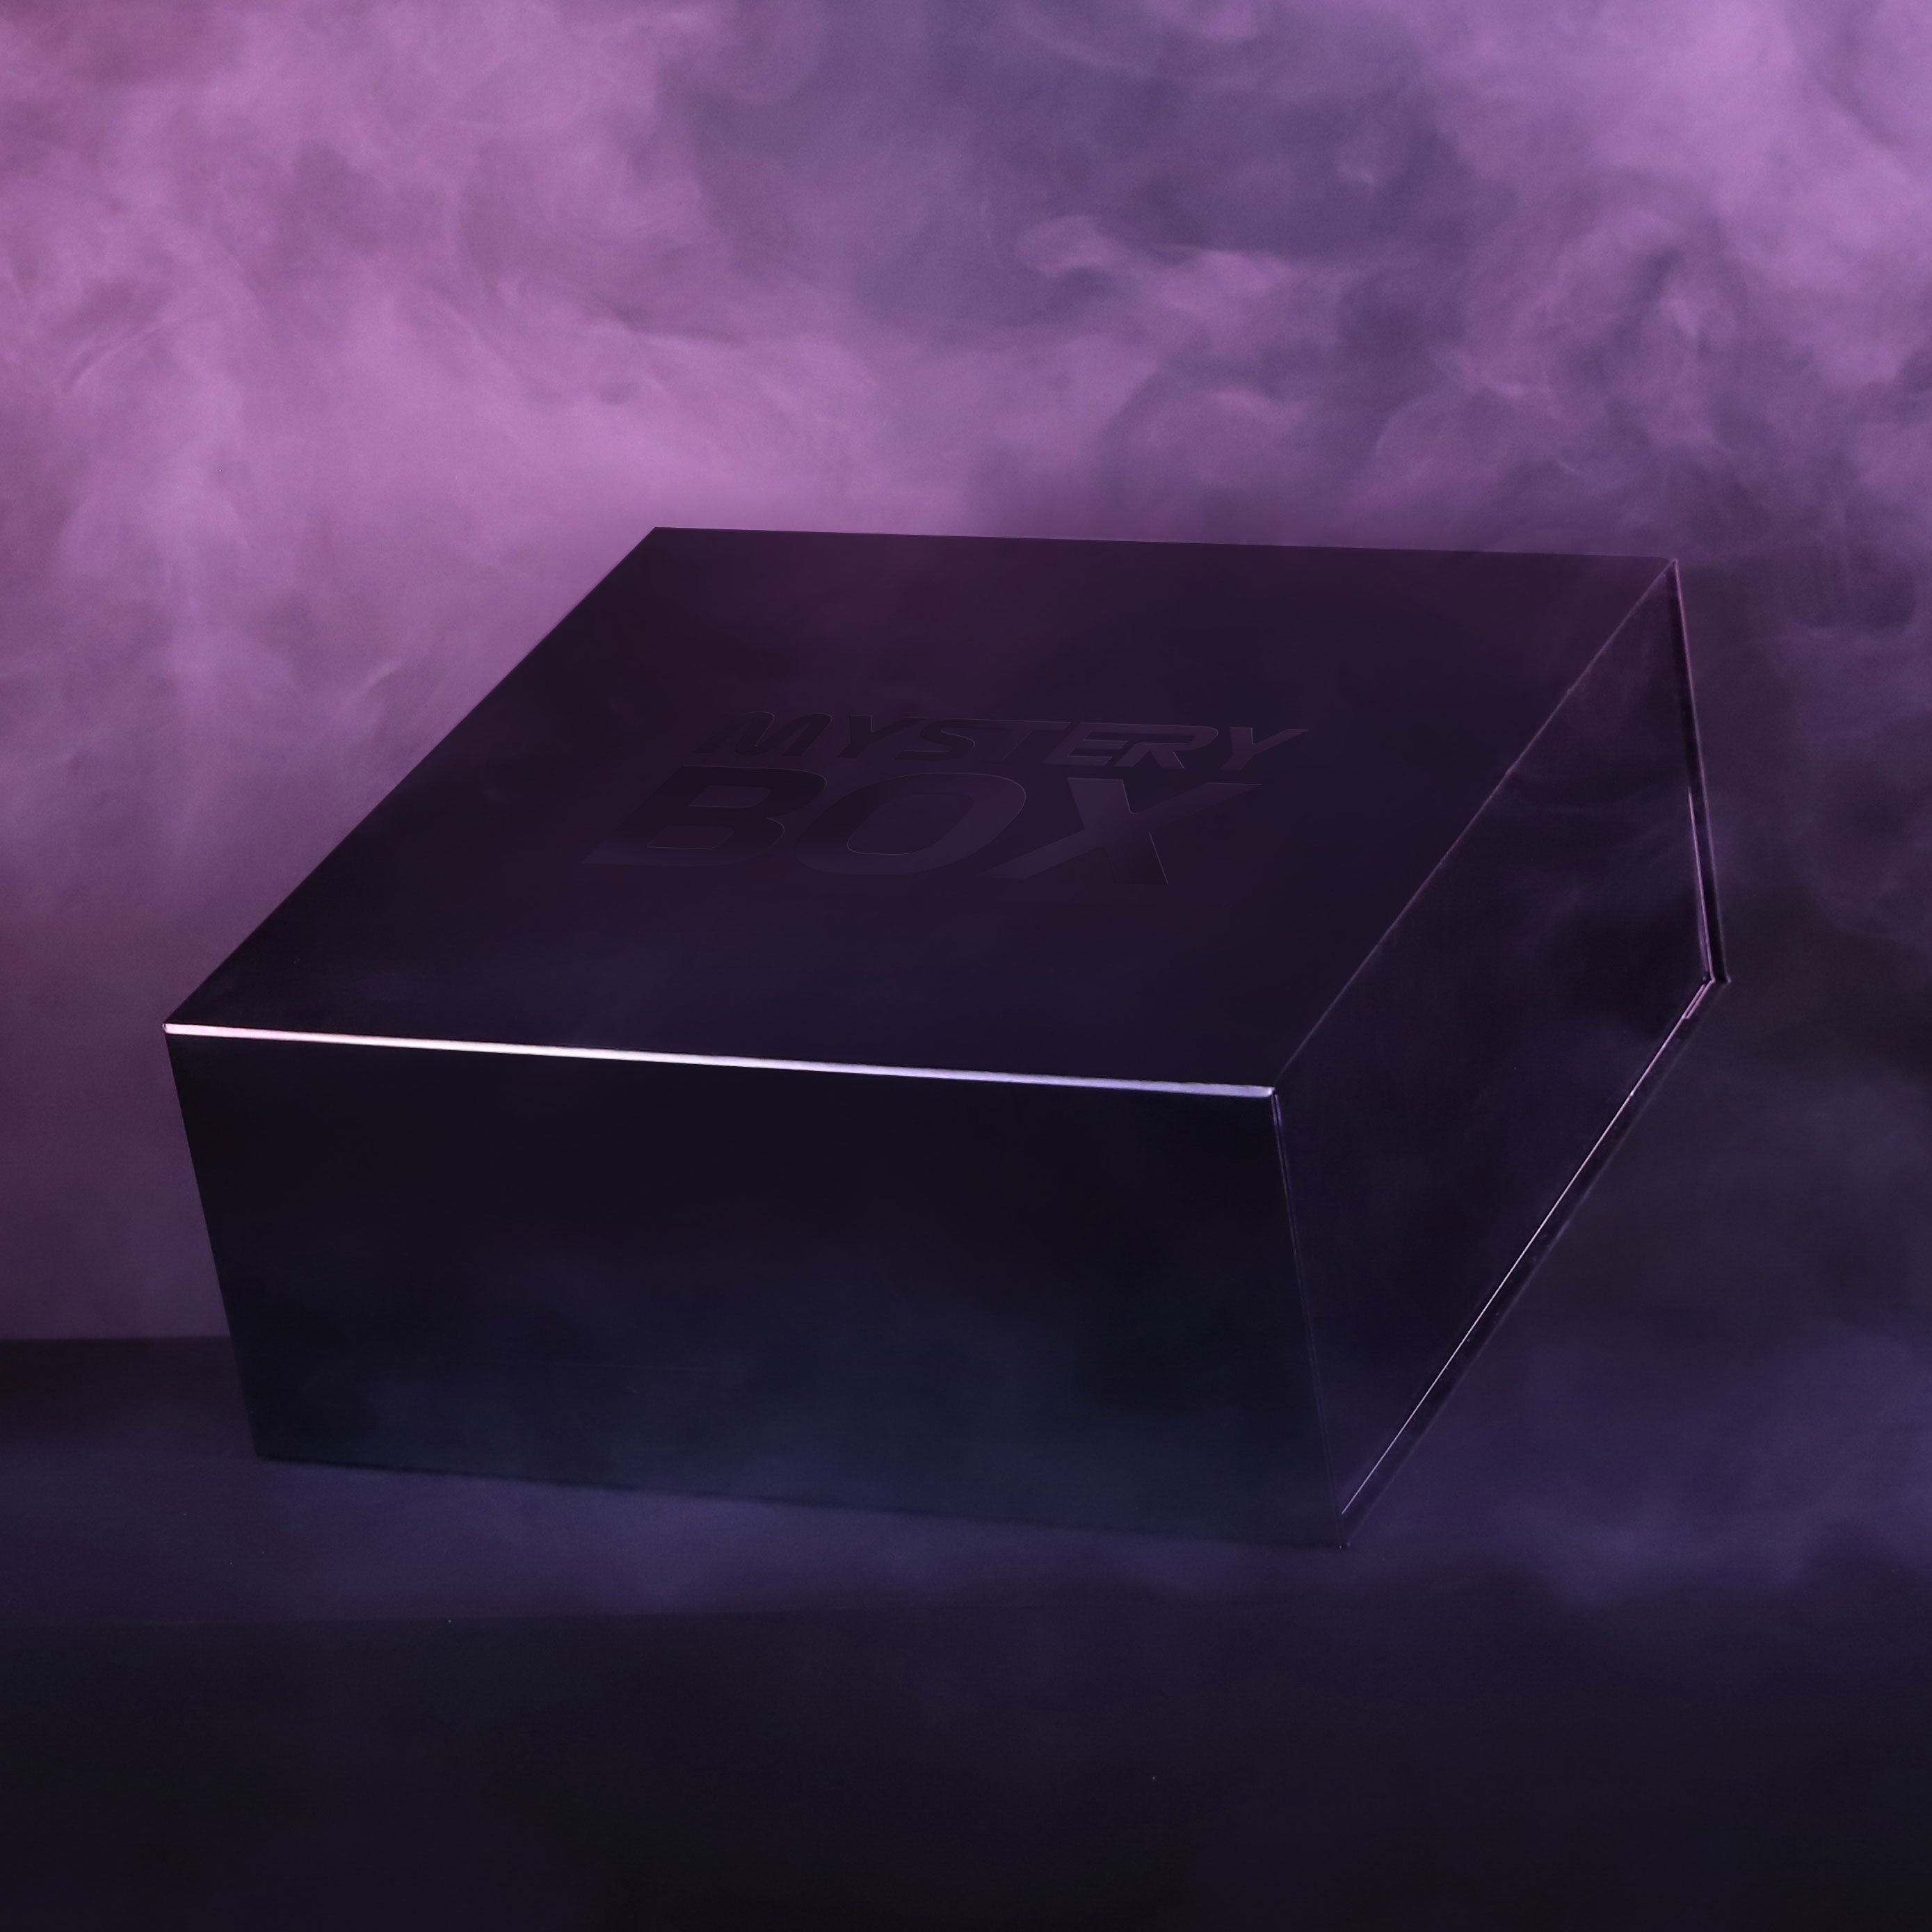 Limited-Edition F1 Authentics Mystery Box 2.0